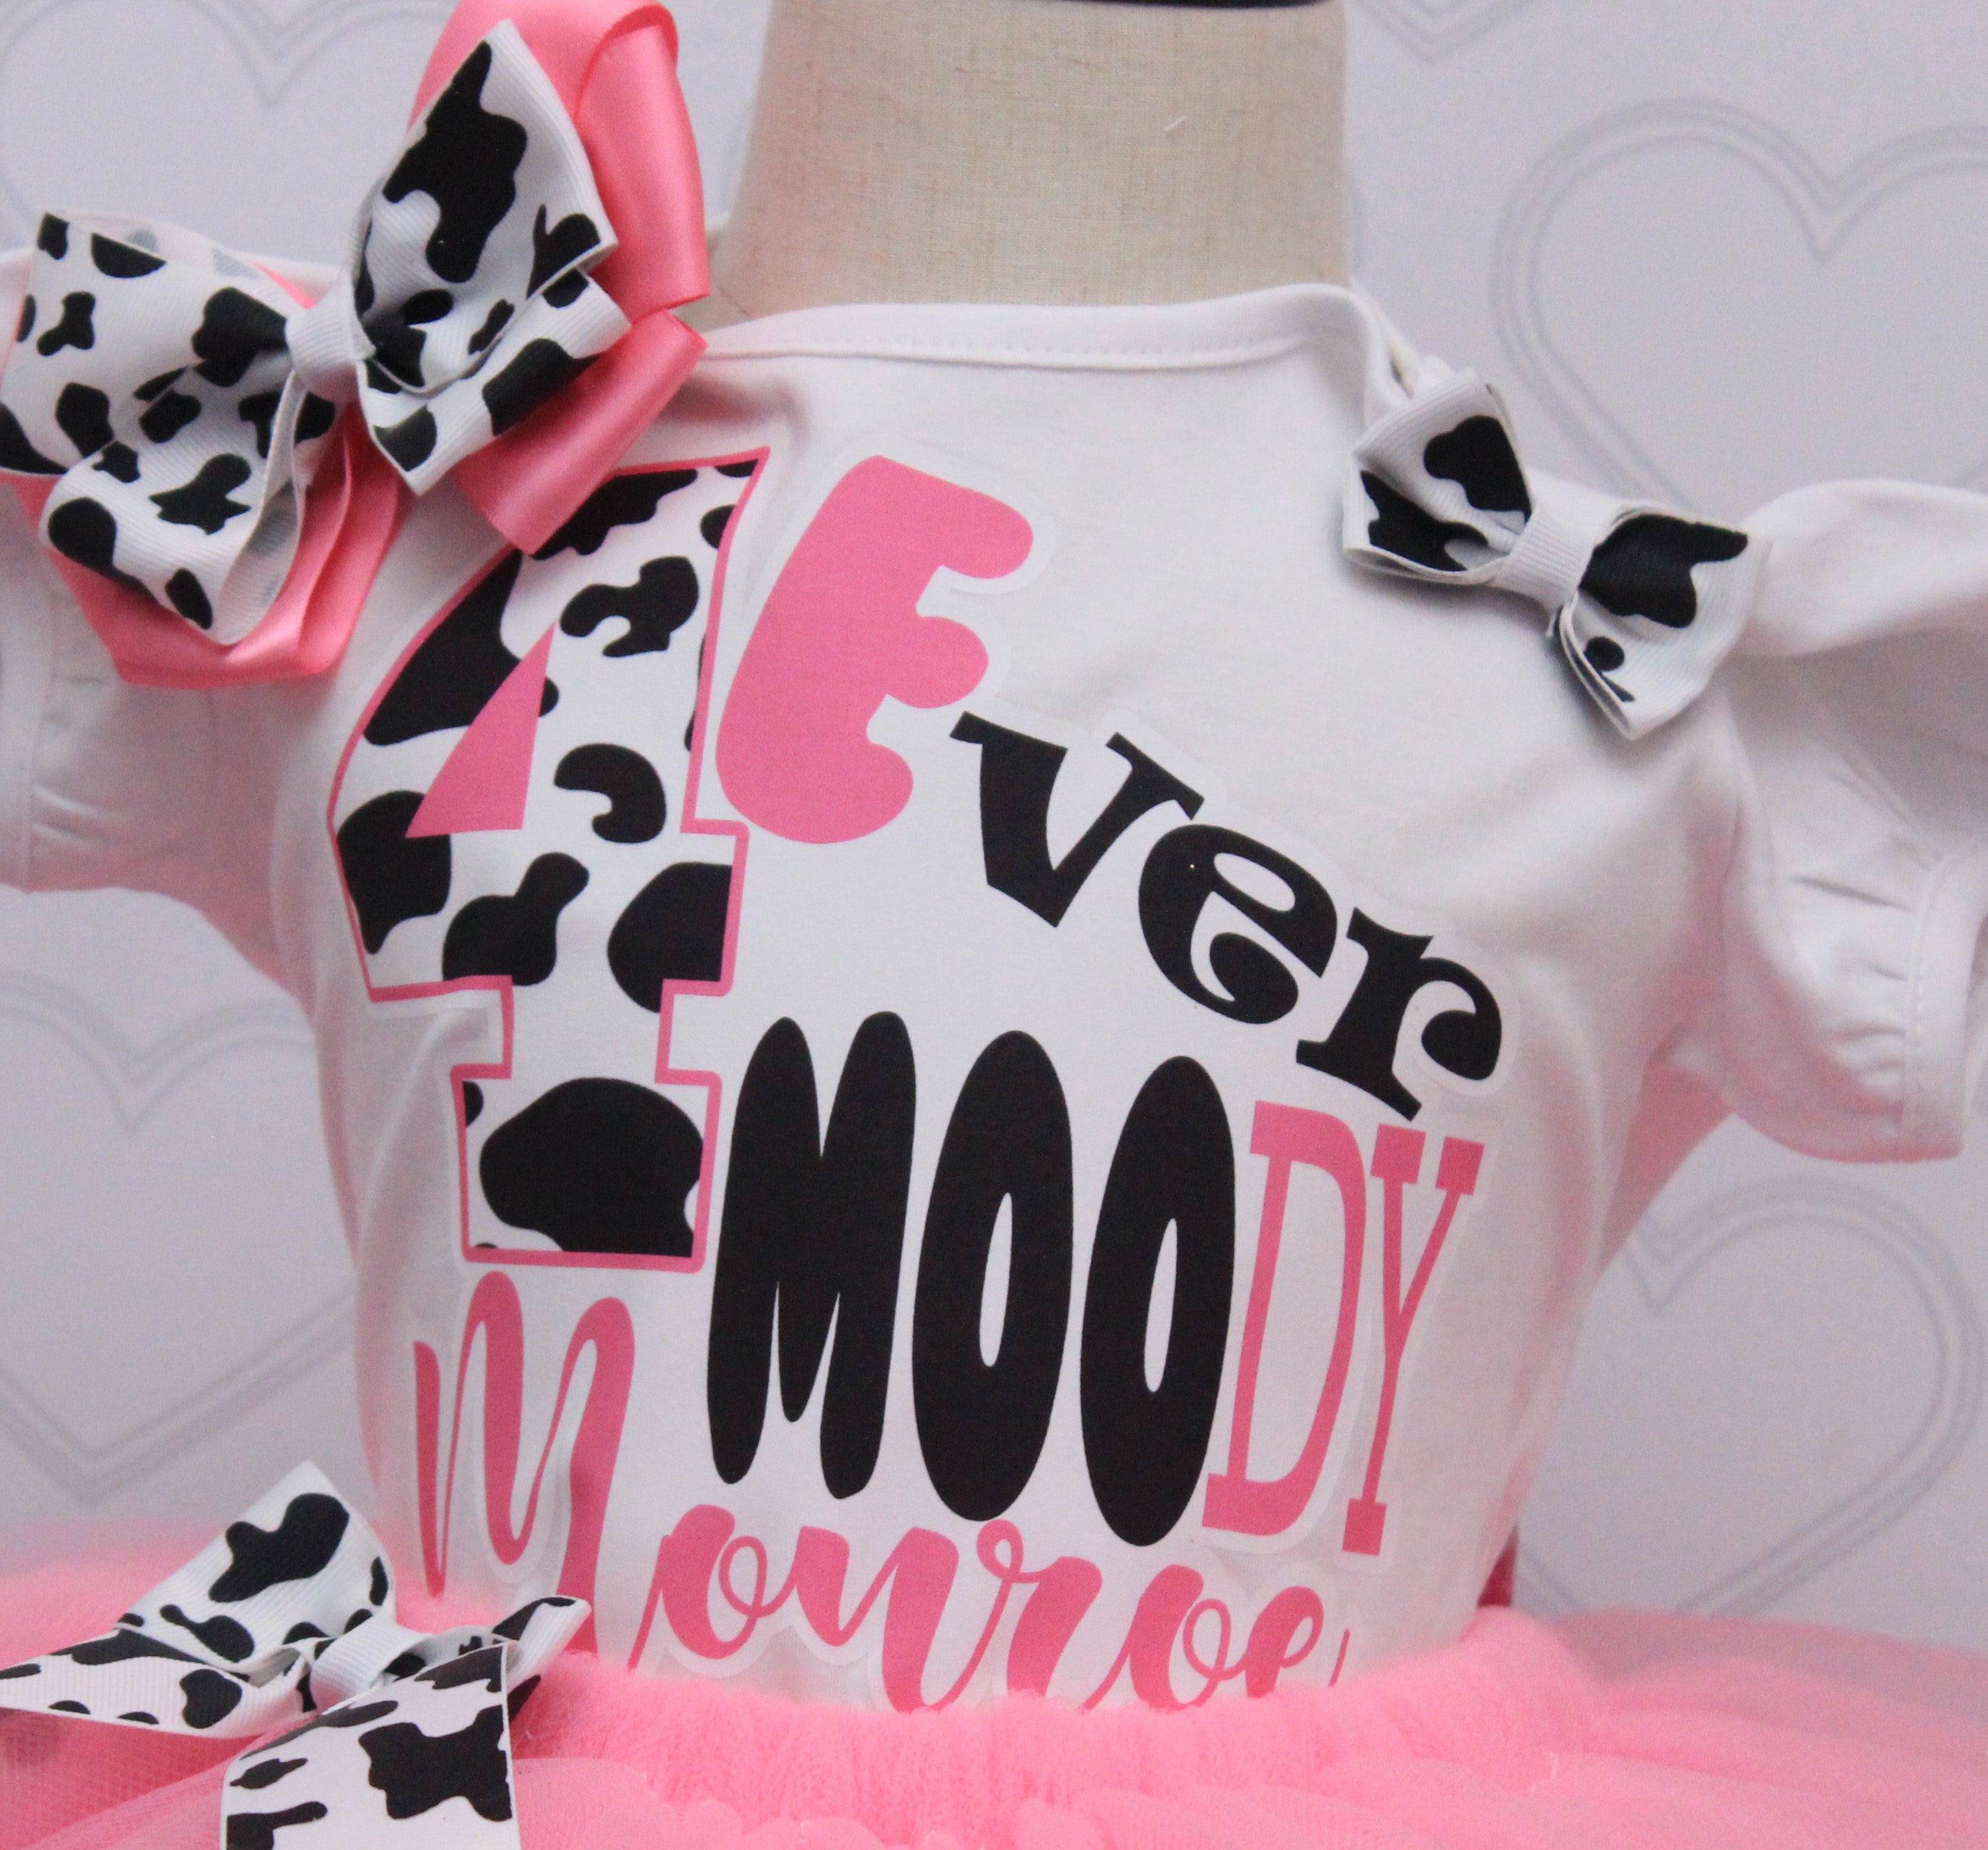 Cow tutu set-Cow outfit-Cow birthday outfit- cow birthday-4-Ever MOOdy outfit